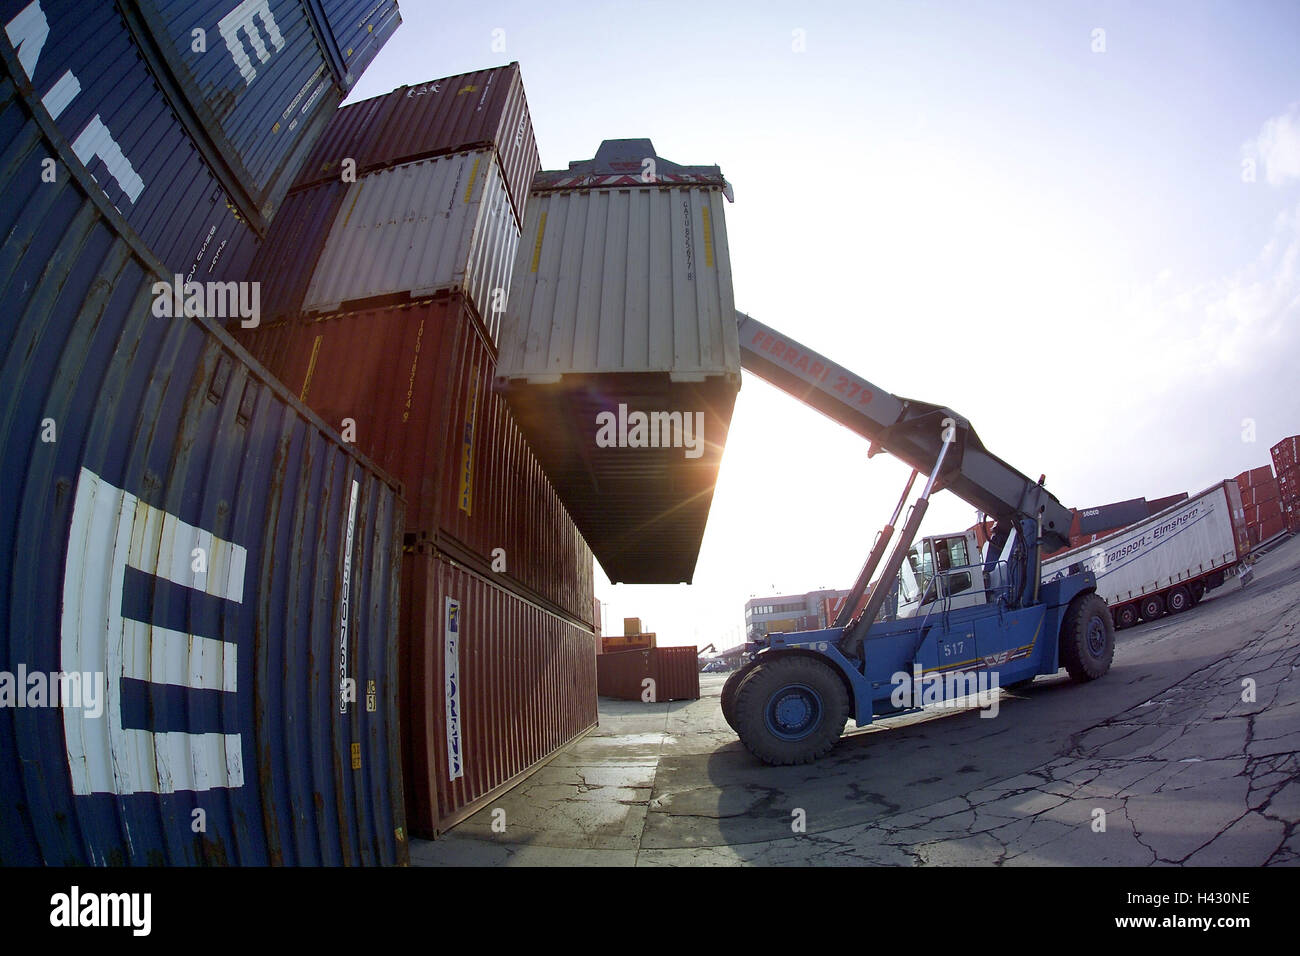 Germany, Hamburg, Containerhafen, Penance Hanseatic league terminal, transporter,, Containers, back light, Europe, Hanseatic town, city, seaport, Frachthafen,  Harbor, place of transshipment, BHT, multi Purpose terminal,  Shipping, vehicle, Reachstacker, Containerstapler, transportation, freight, freight, stowing, export, import, transportation, Cargo, logistics, economy, Stock Photo